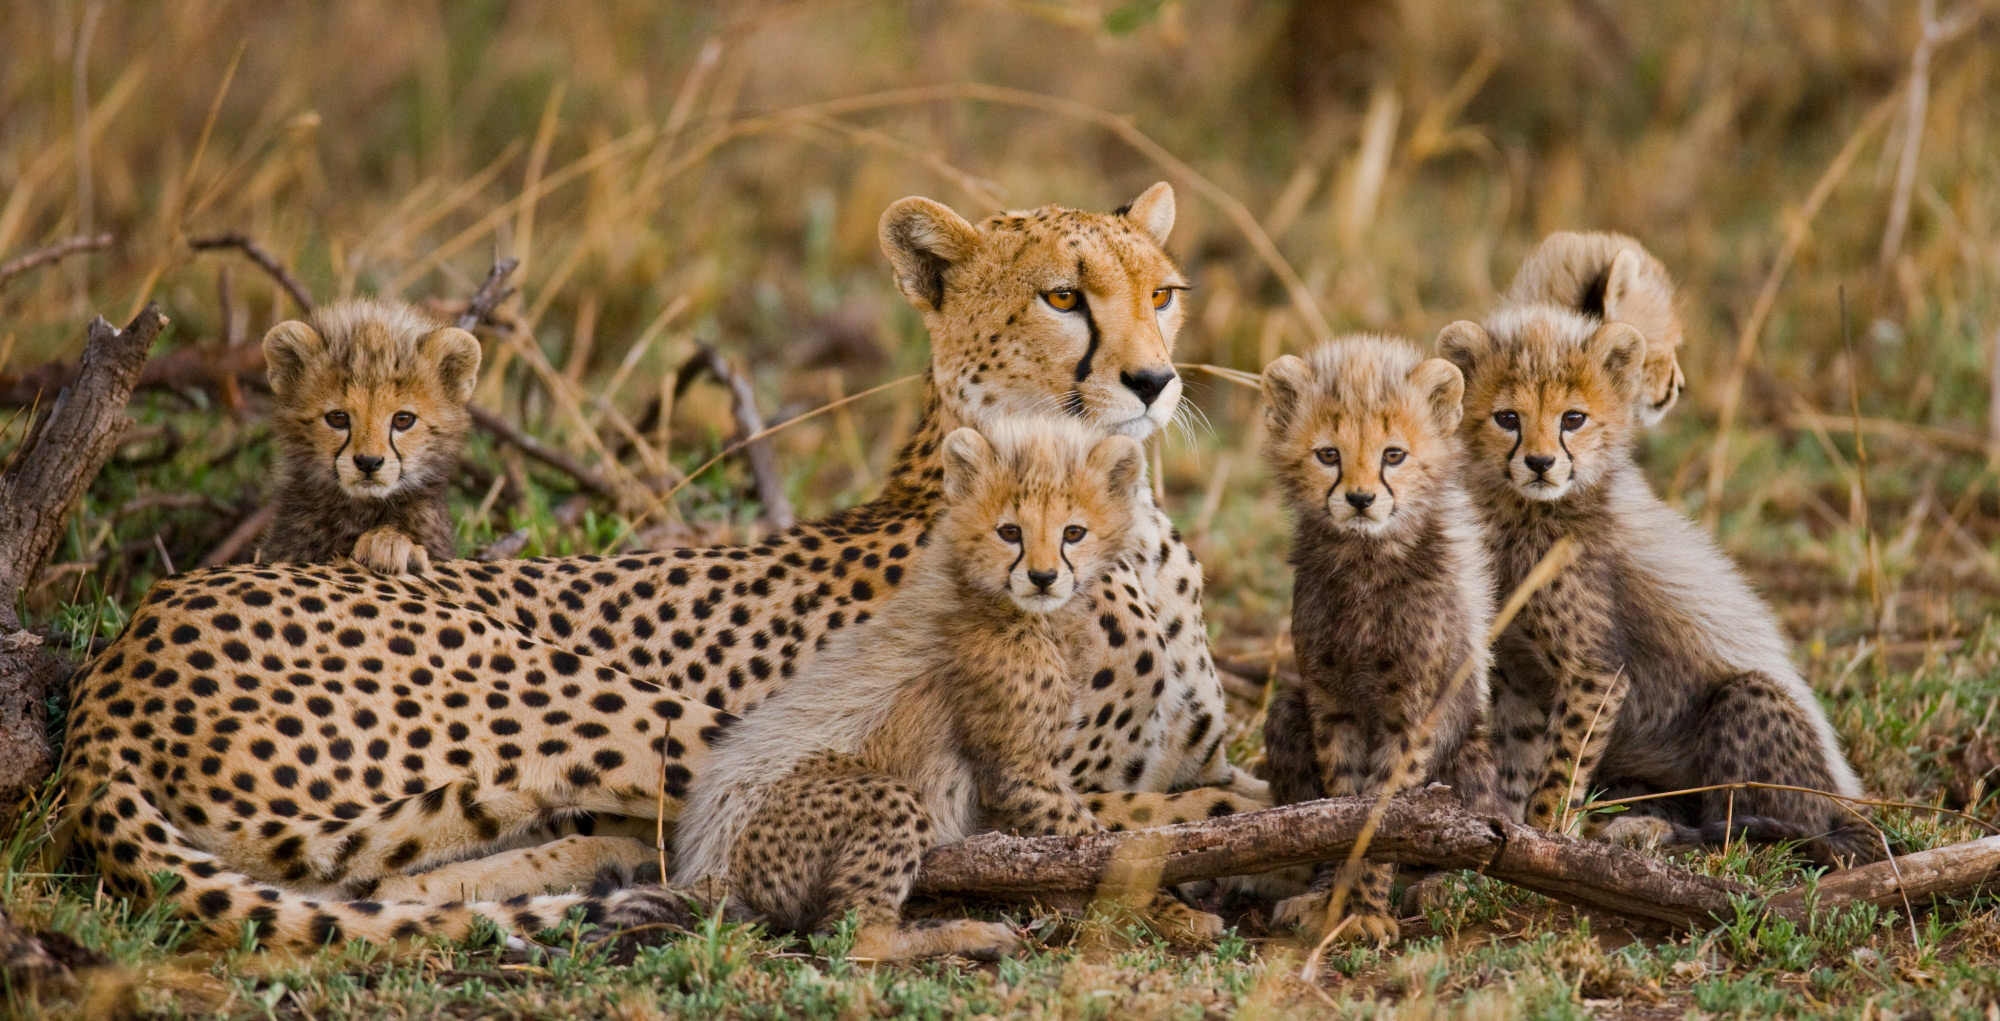 A cheetah mother with her cubs in Serengeti National Park, Tanzania